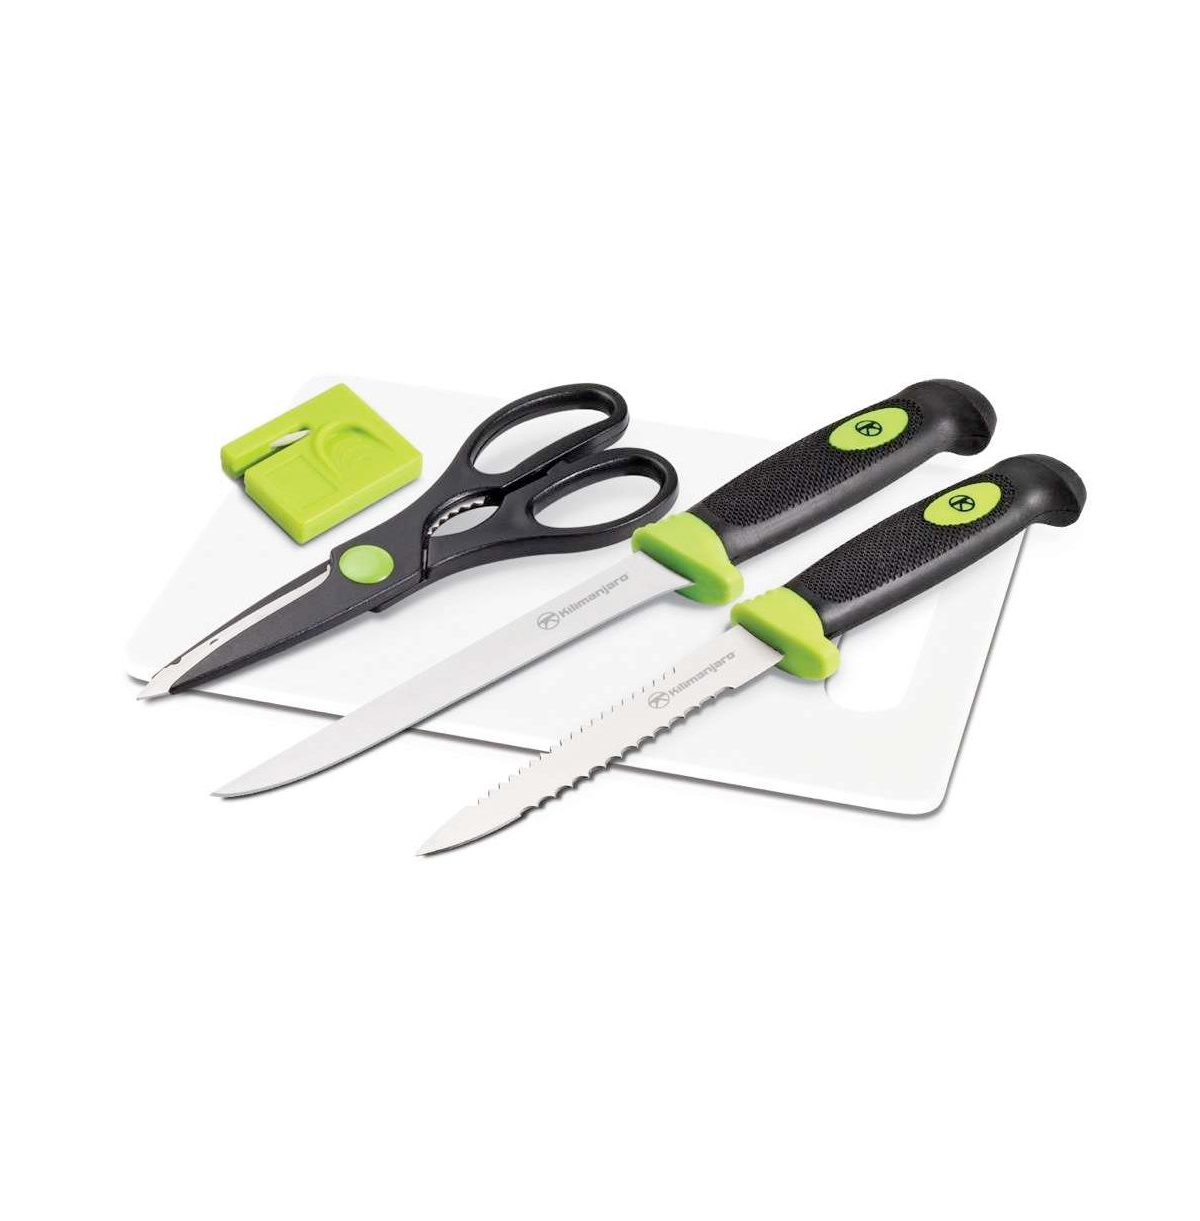 5 Piece Fishing Knife Set with Storage Case - Green